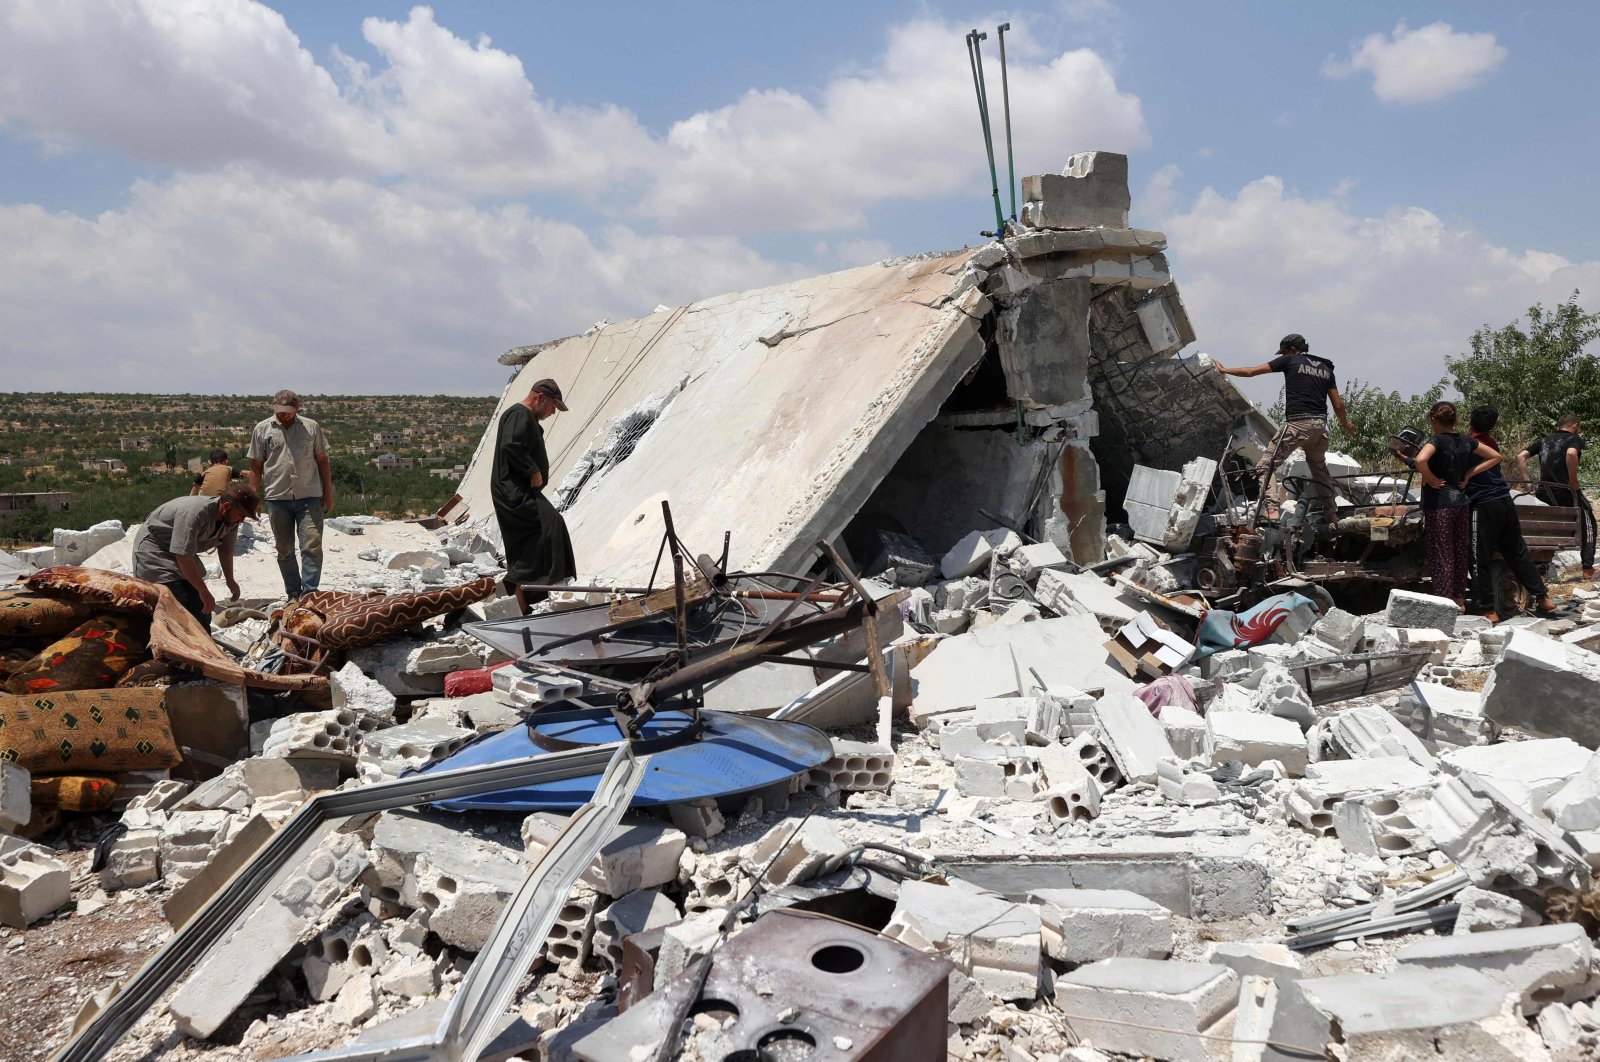 People salvage belongings from a house destroyed by a Russian missile attack in the Jabal al-Zawiya region in opposition-held Idlib province, Syria, July 4, 2021. (AFP Photo)